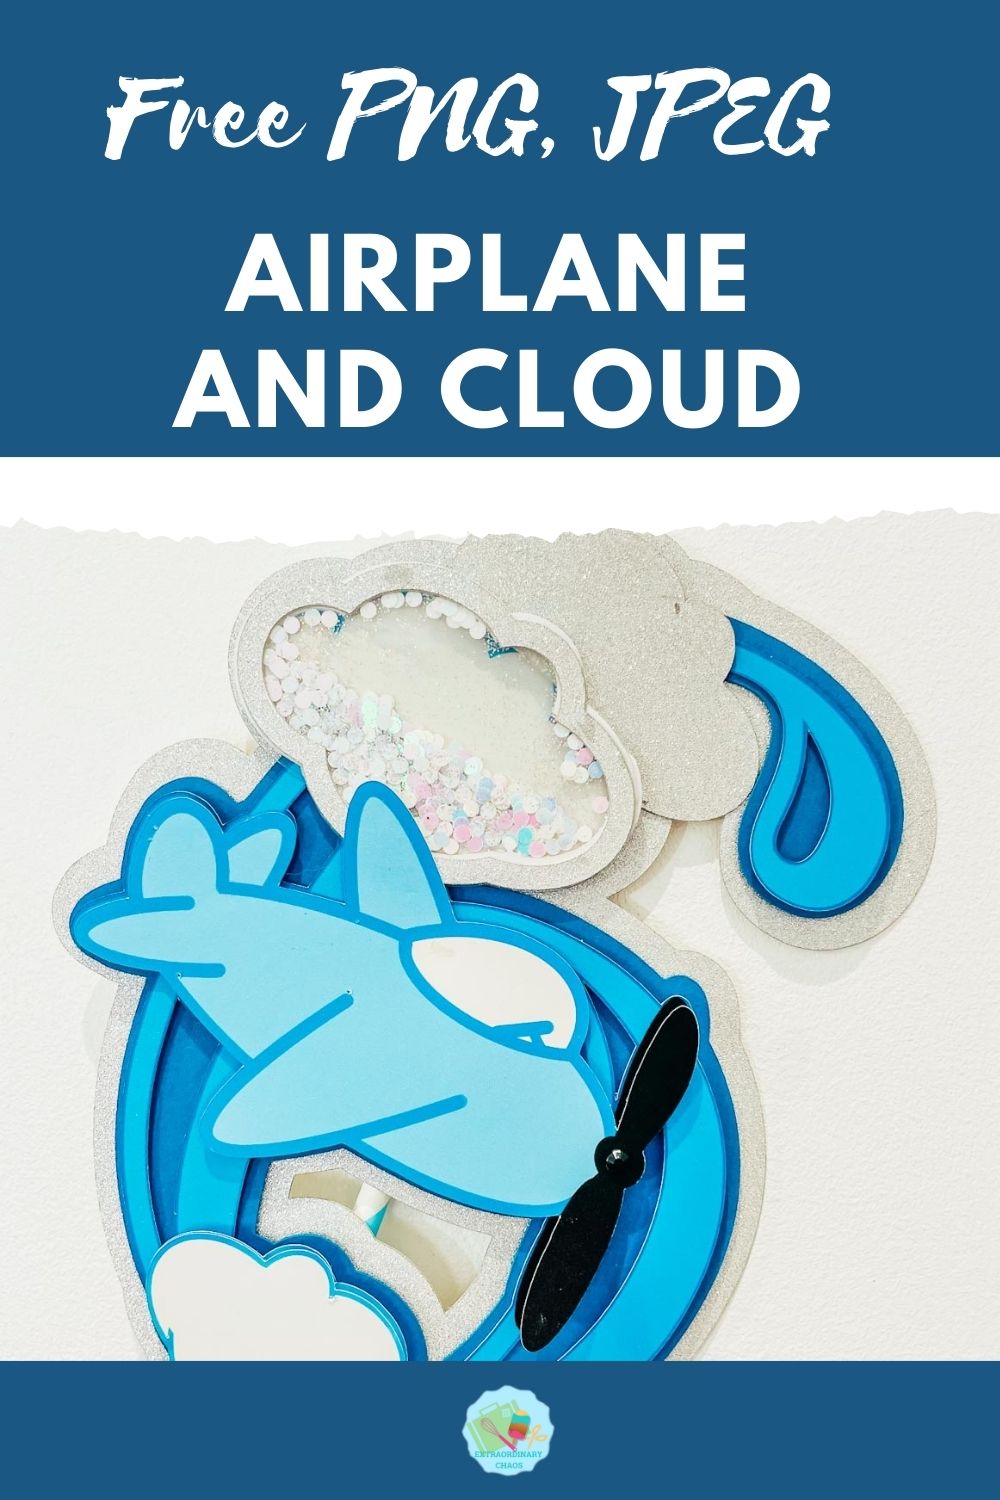 Free Printable Airplane and cloud PNG Files for print and cut projects